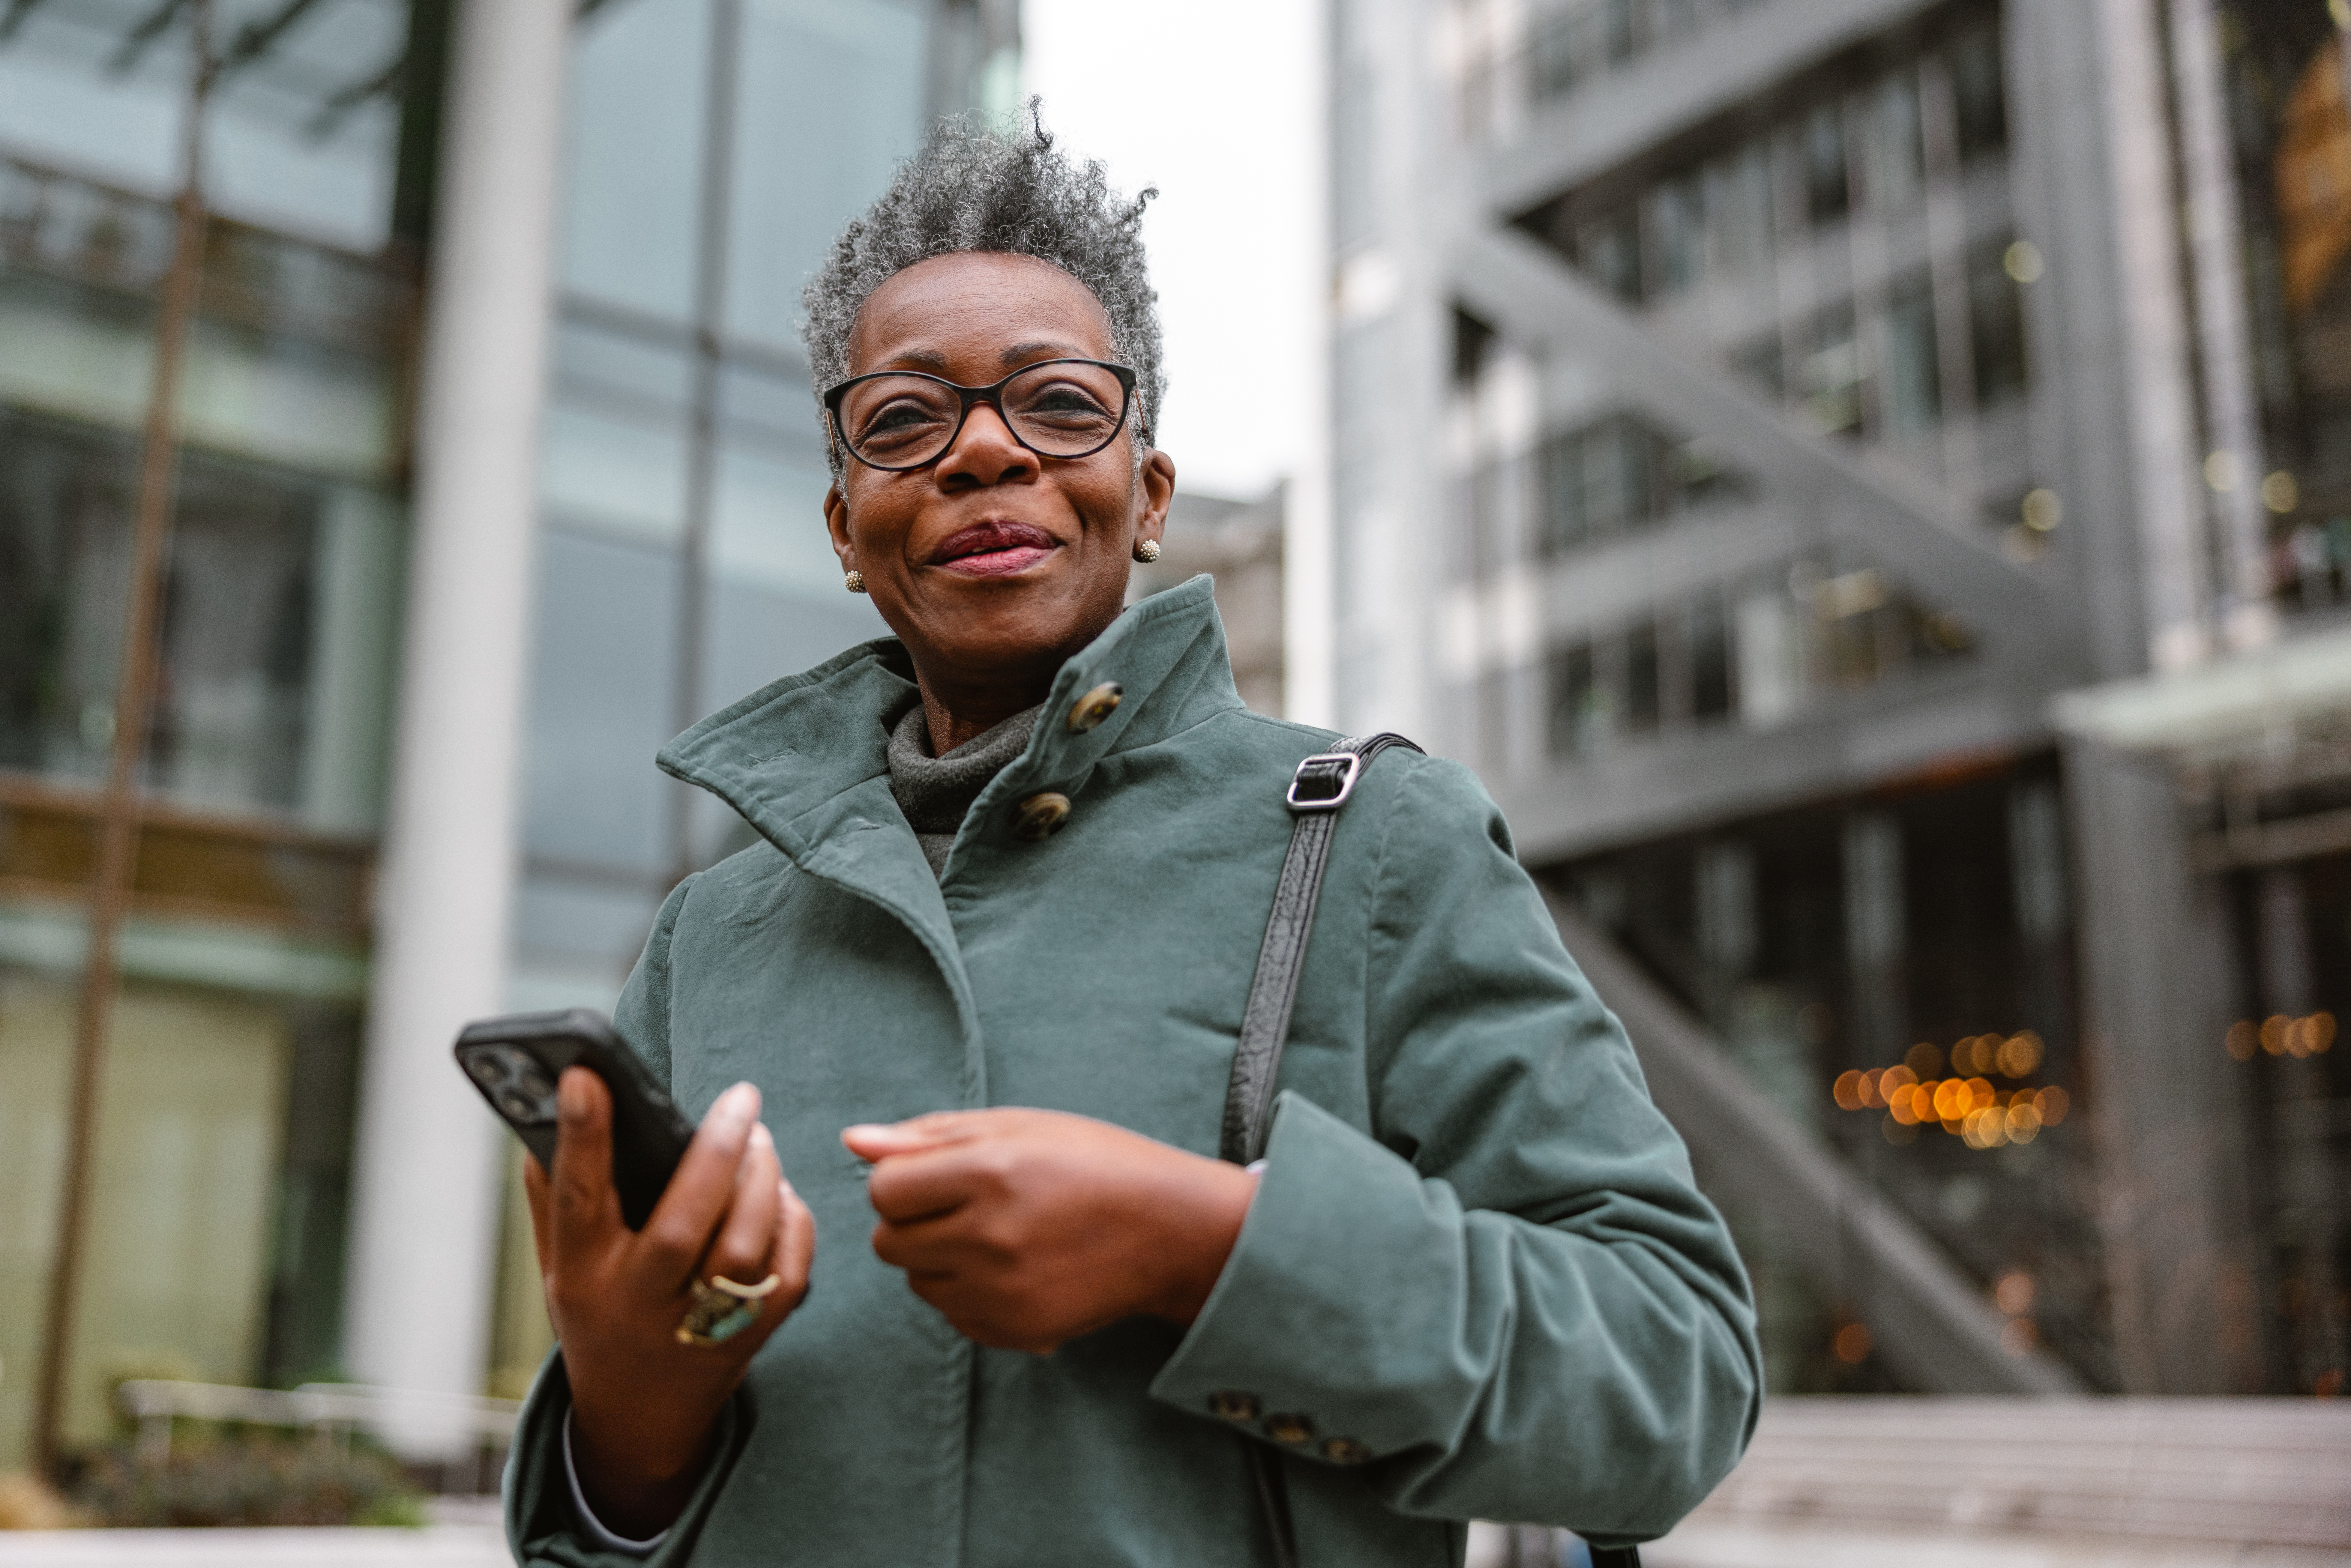 An older Black woman stands outside in a city holding a phone and smiling at the camera